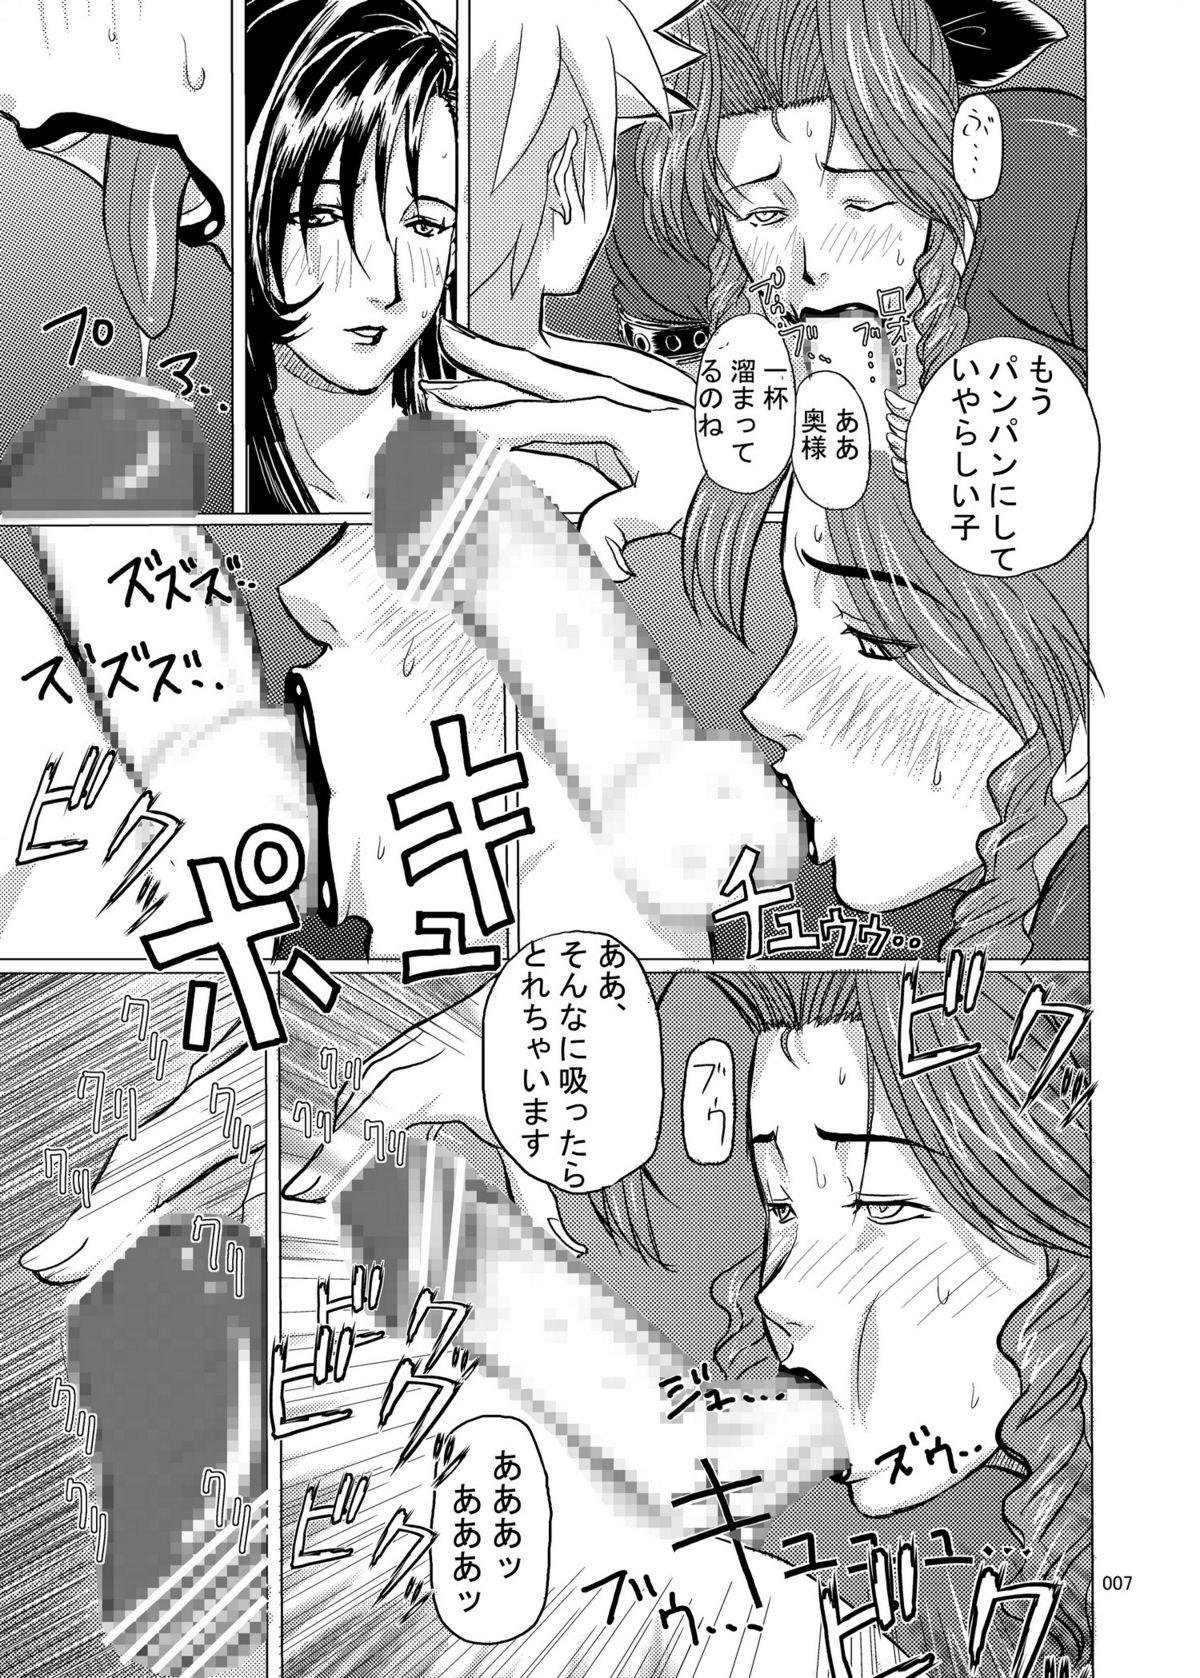 Compilation Mrs.&Mrs, - Final fantasy vii This - Page 7